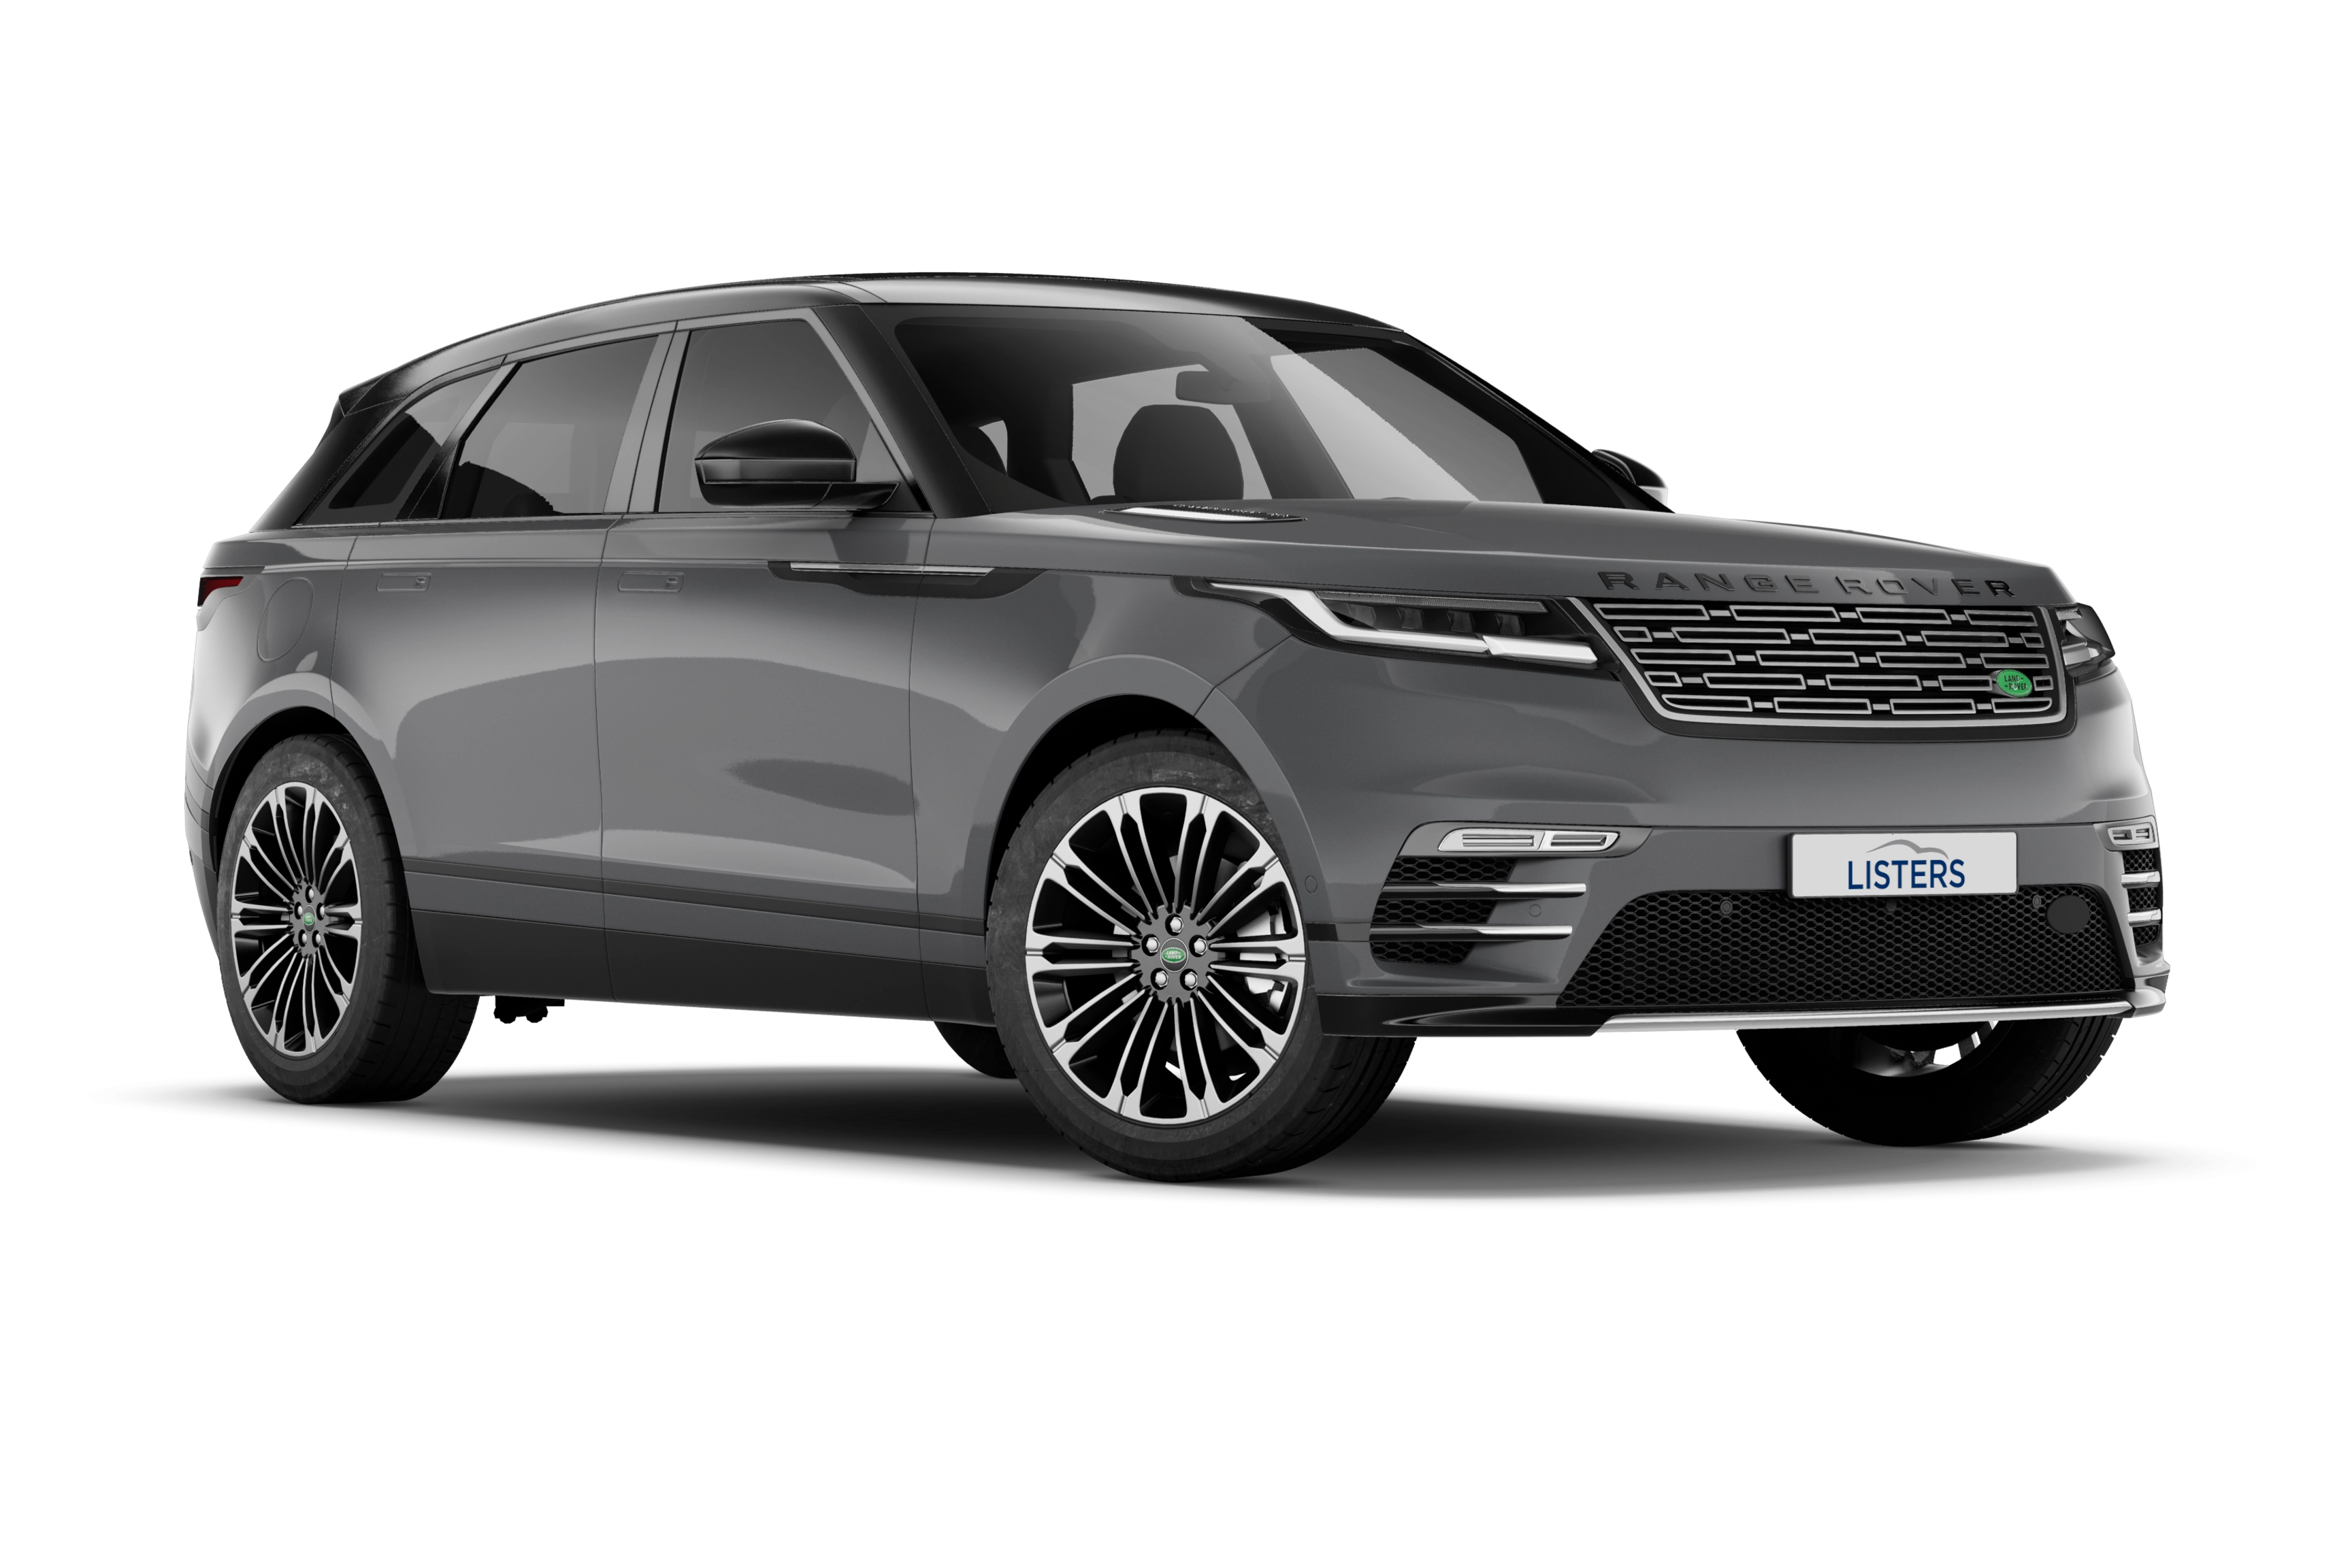 Range Rover Velar Contract Hire & Leasing Offers